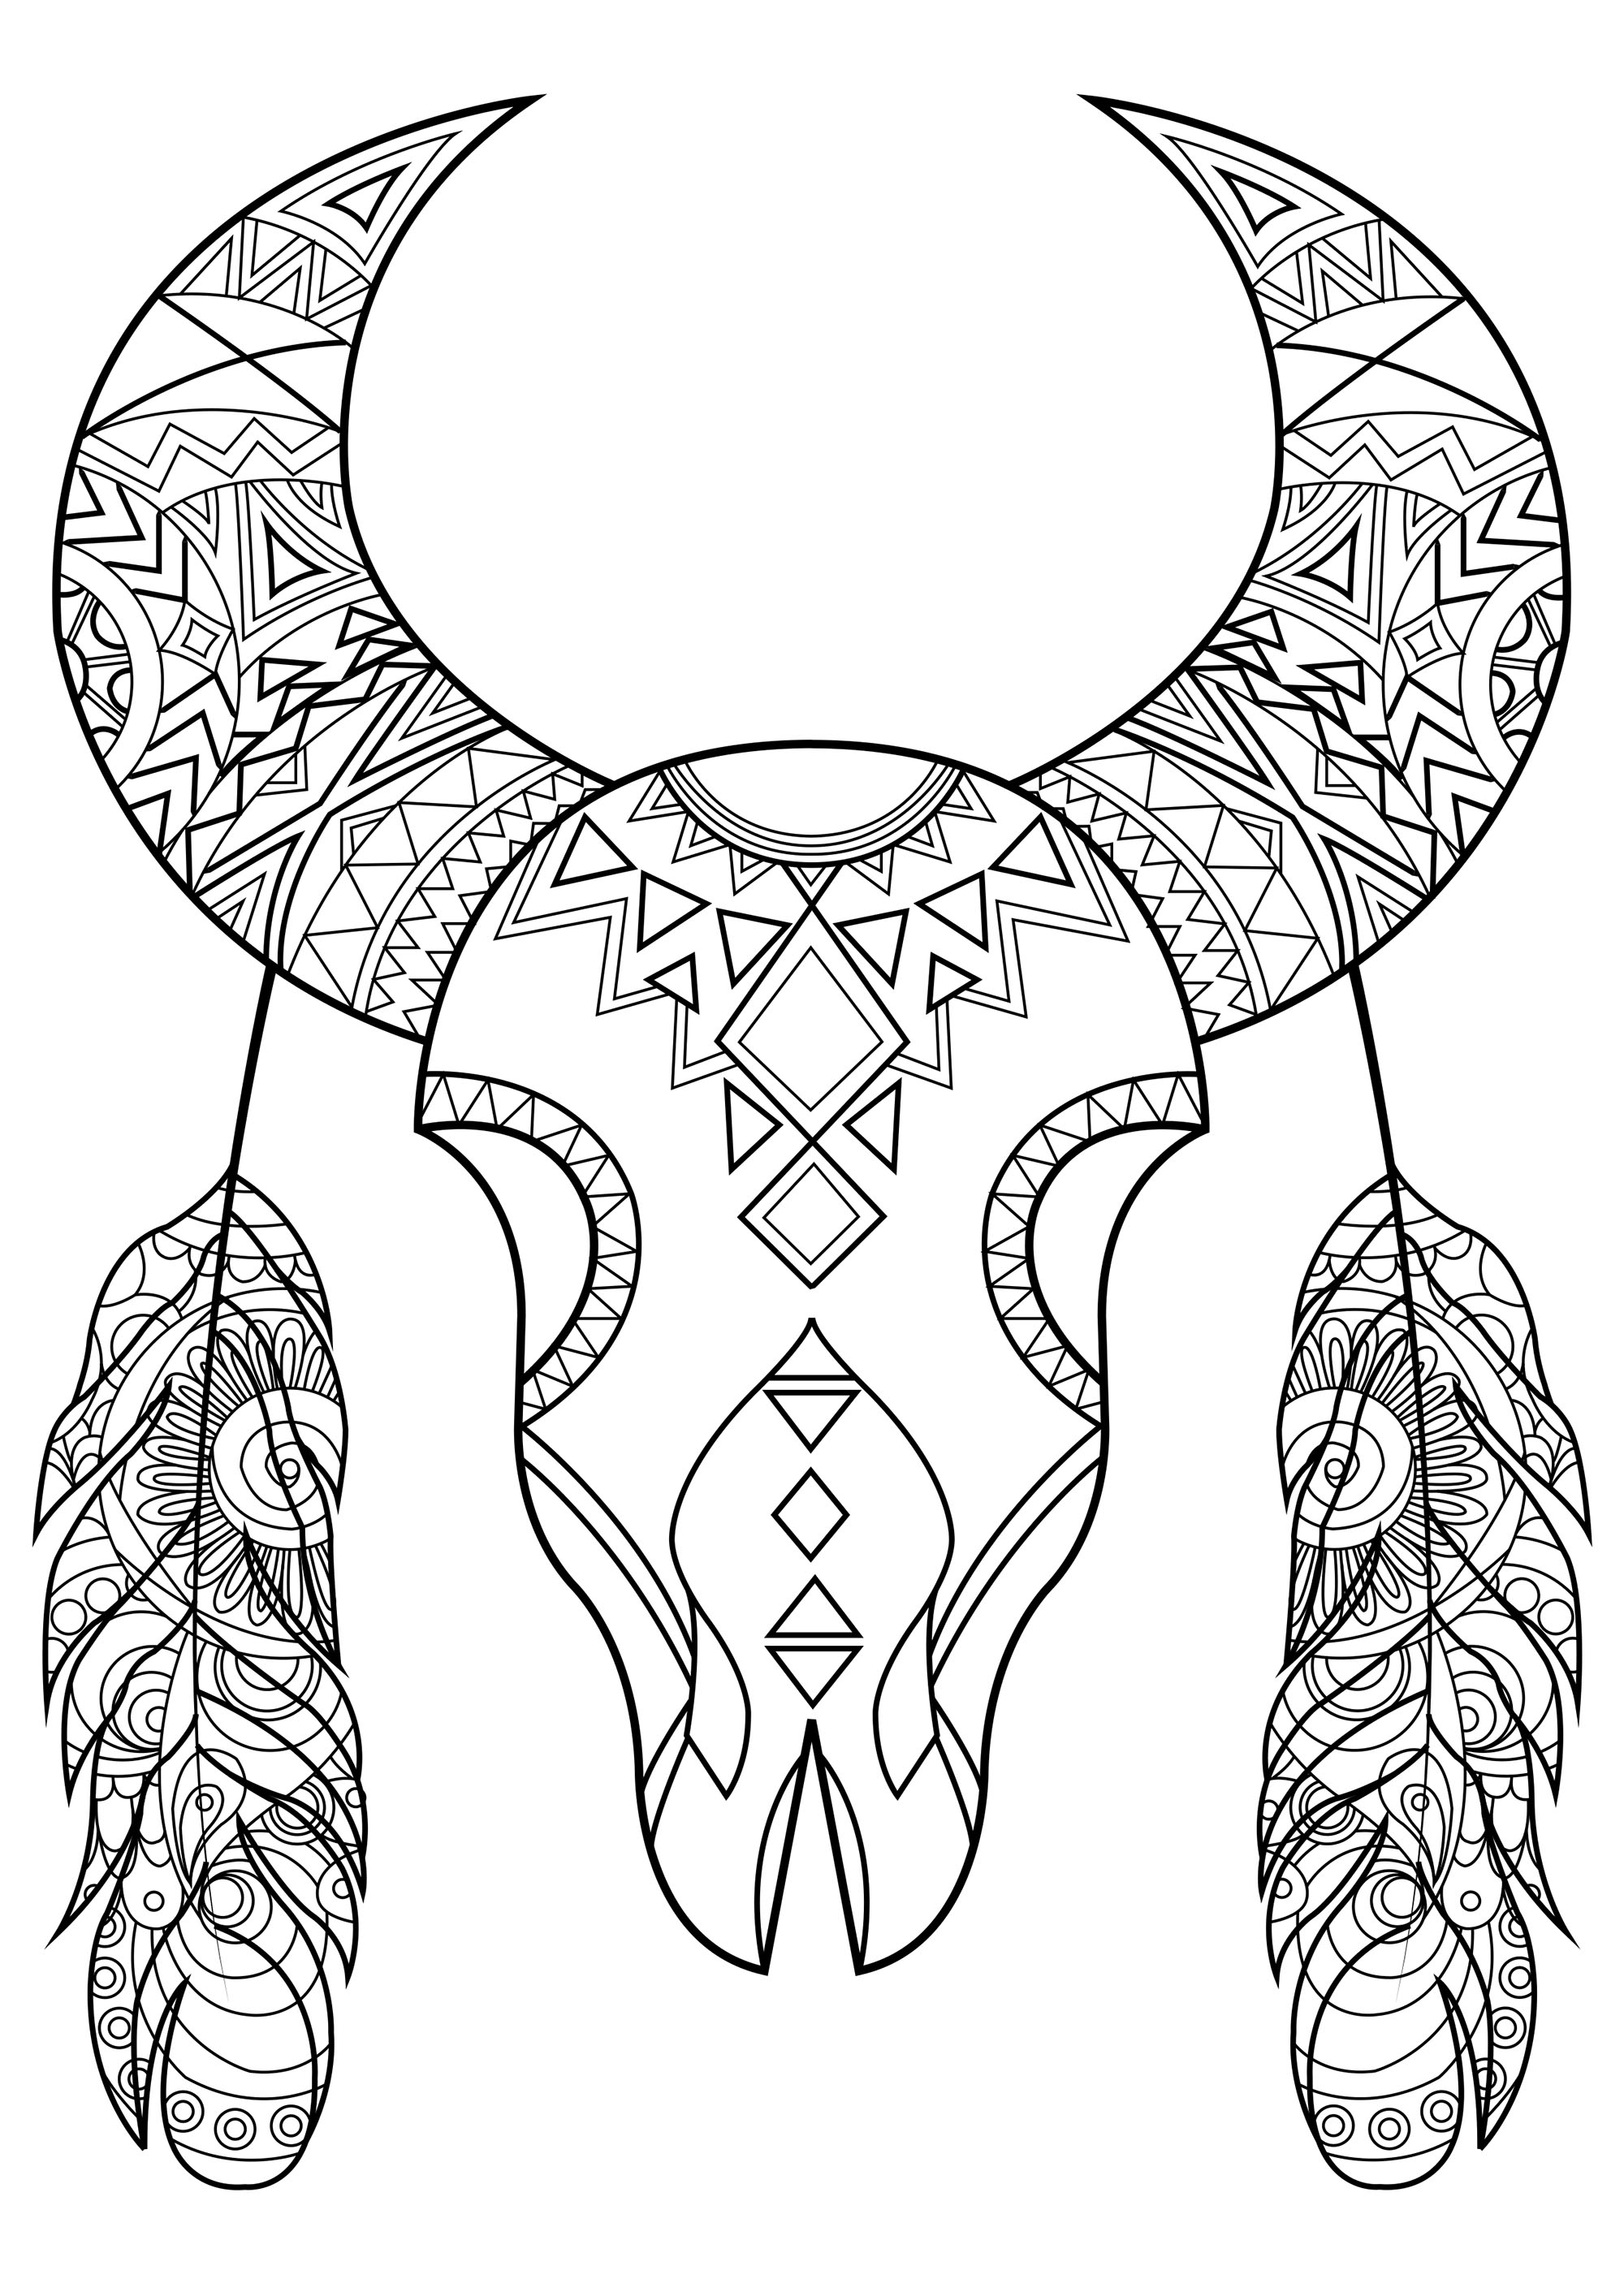 Download Bull Skull - Native American Adult Coloring Pages